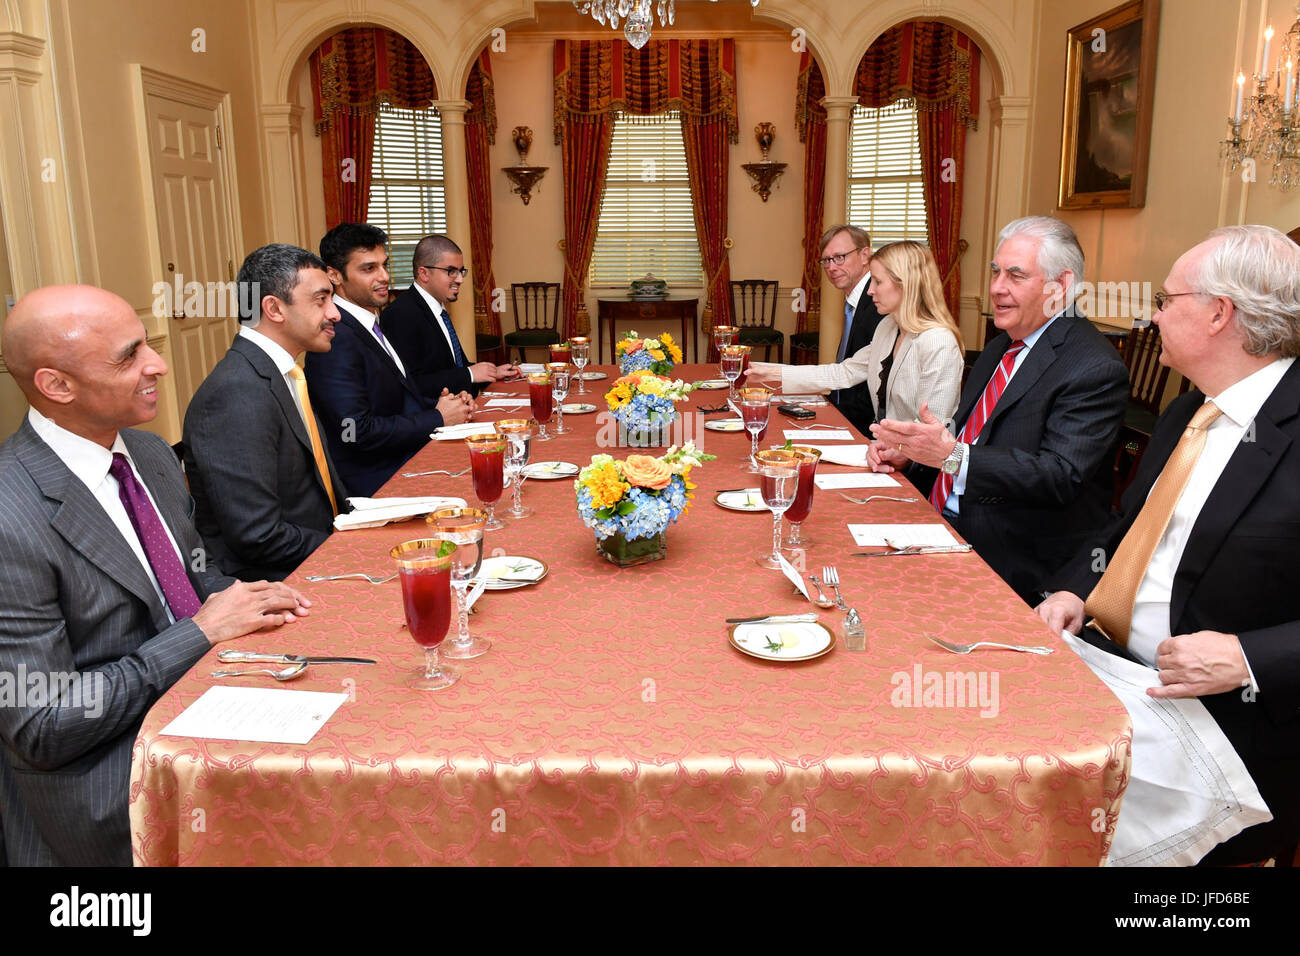 U.S. Secretary of State Rex Tillerson hosts a working dinner for UAE Foreign Minister Abdullah bin Zayed Al Nahyan at the U.S. Department of State in Washington, D.C., on June 14, 2017. Stock Photo